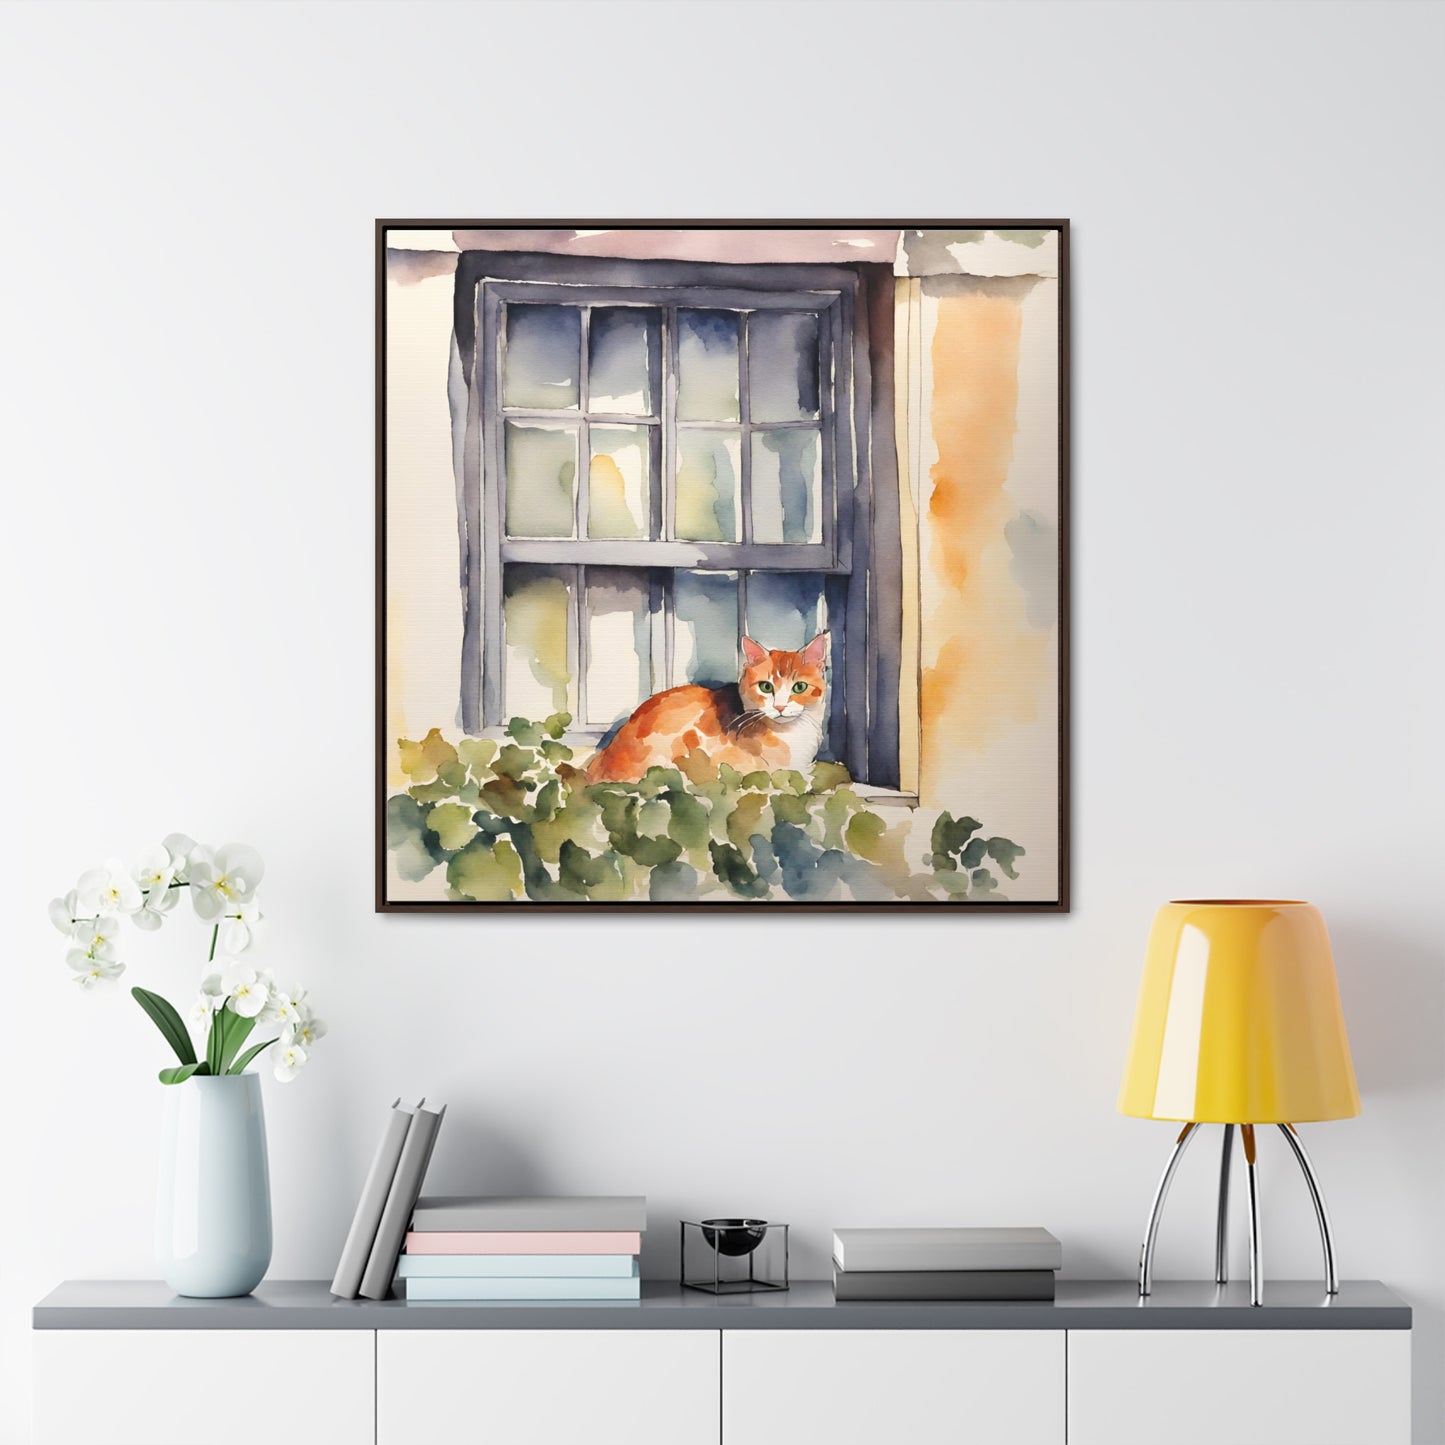 Watercolor Cat in Window Gallery Canvas Wraps, Square Frame